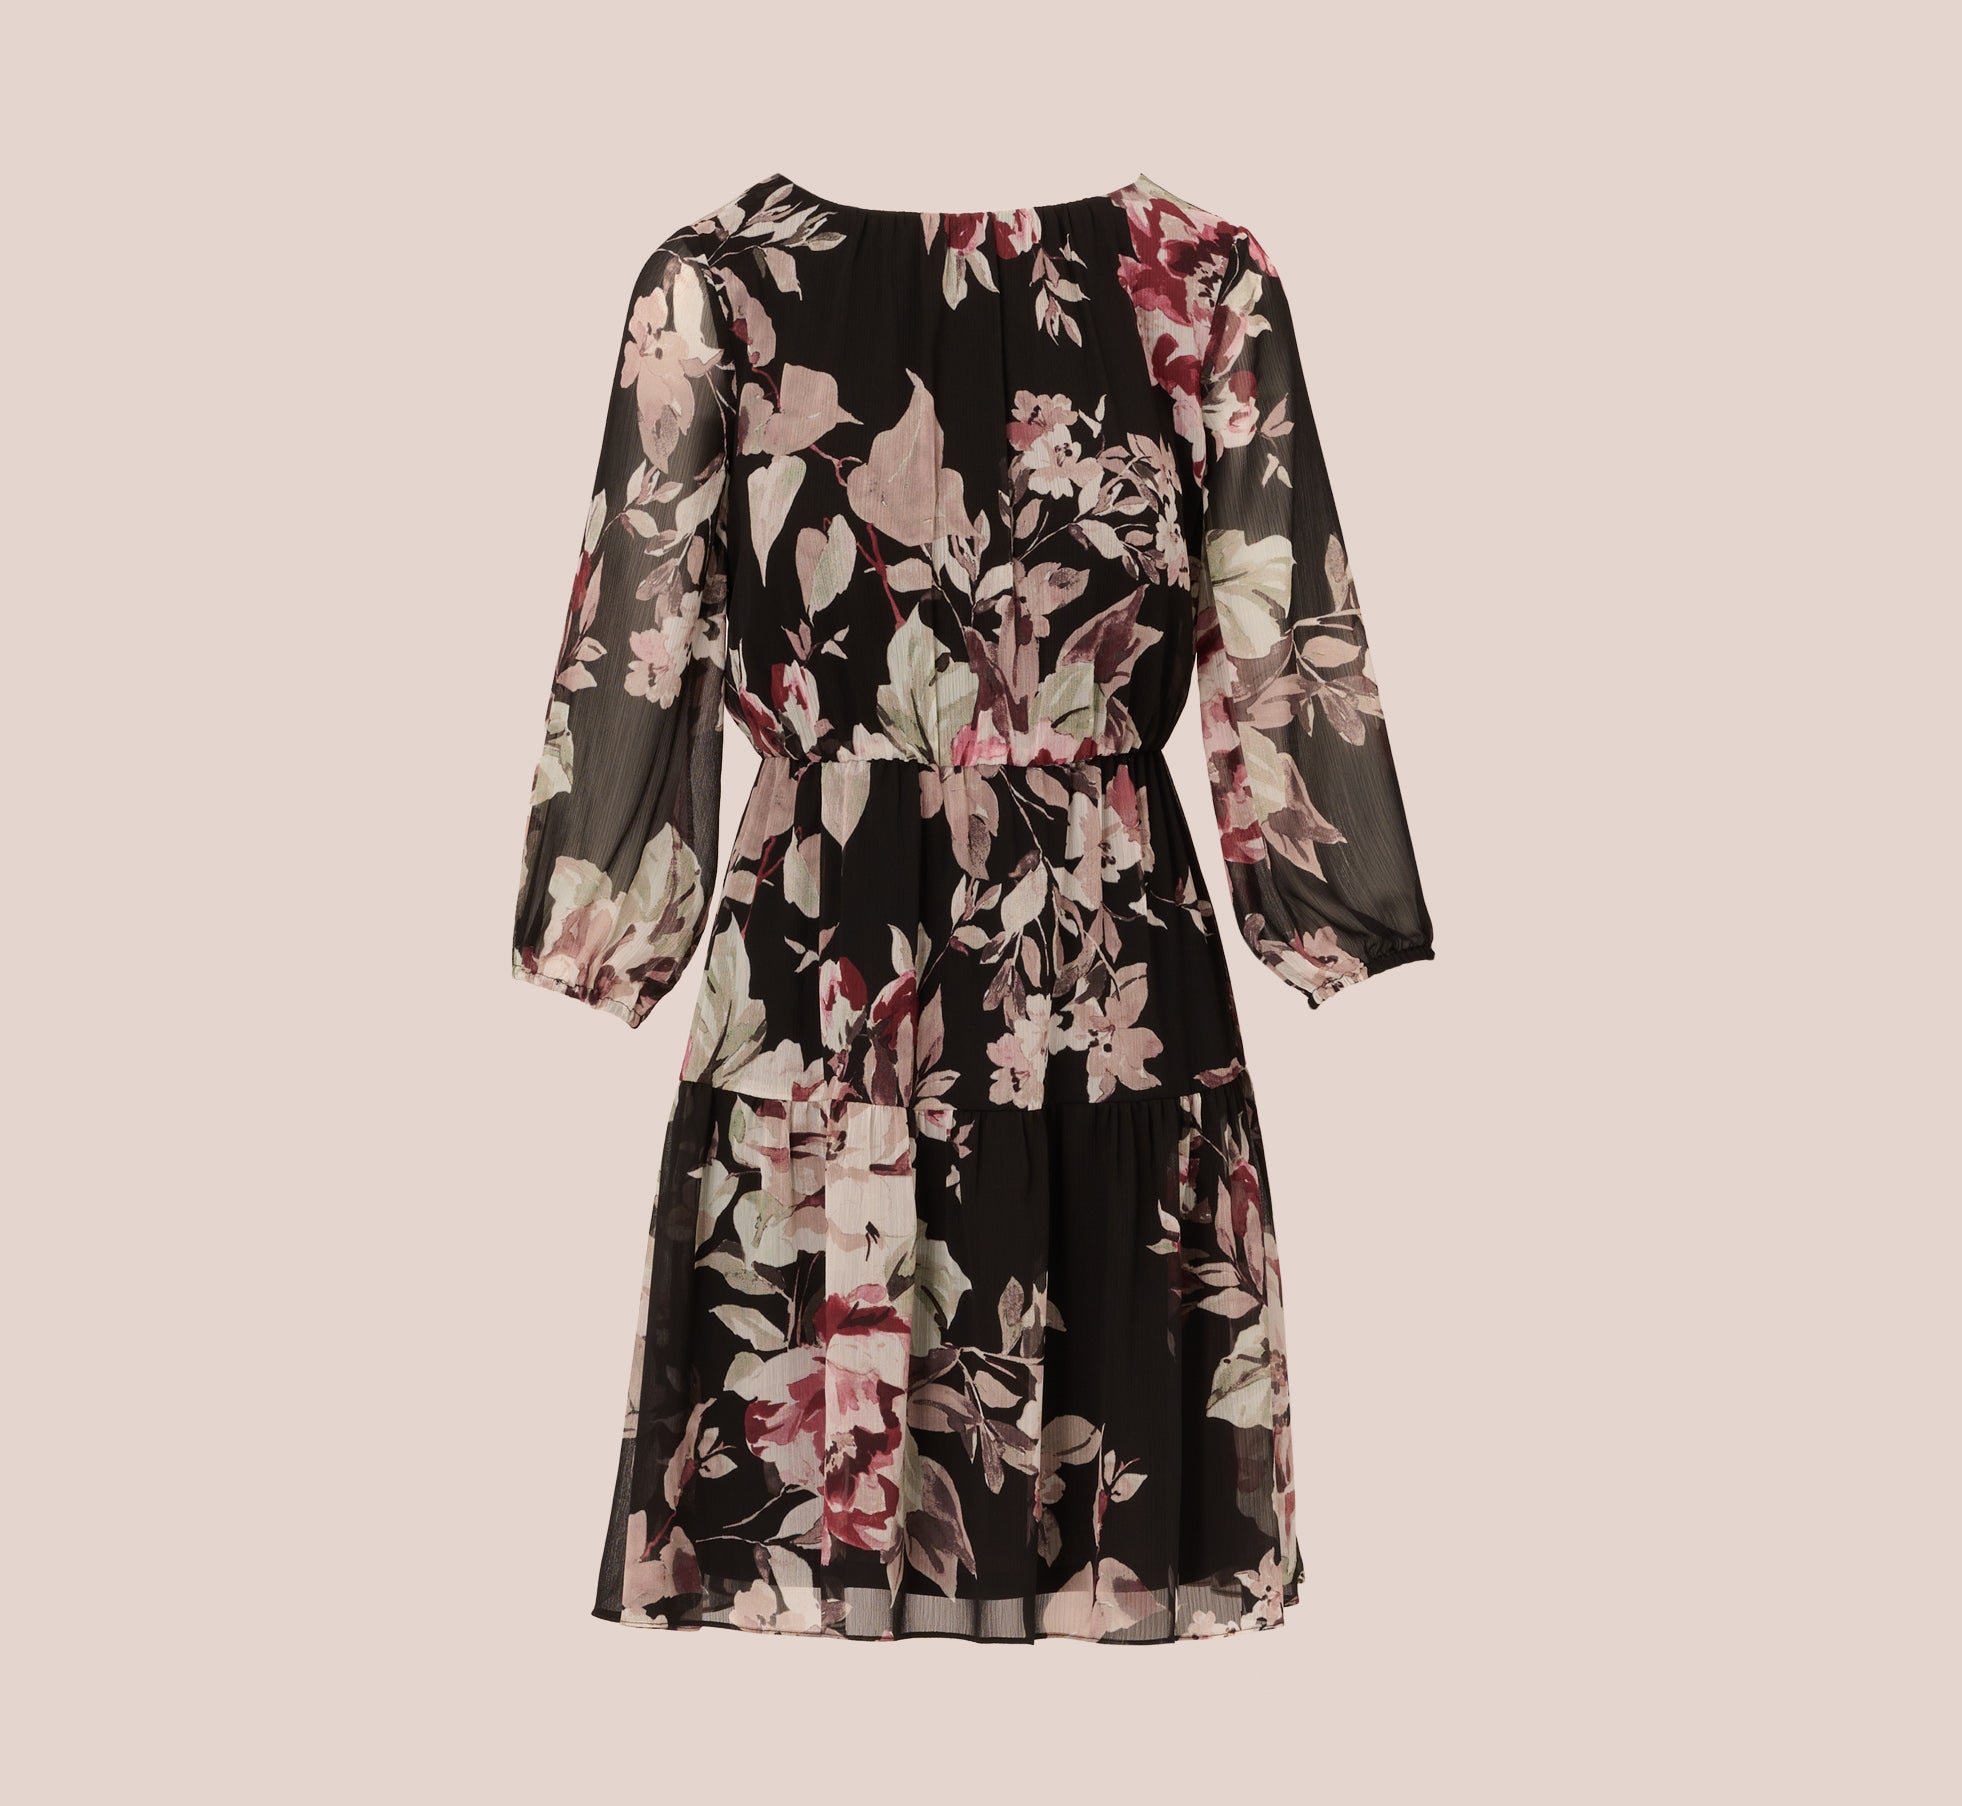 Floral Chiffon Dress With Three Quarter Length Sleeves In Black